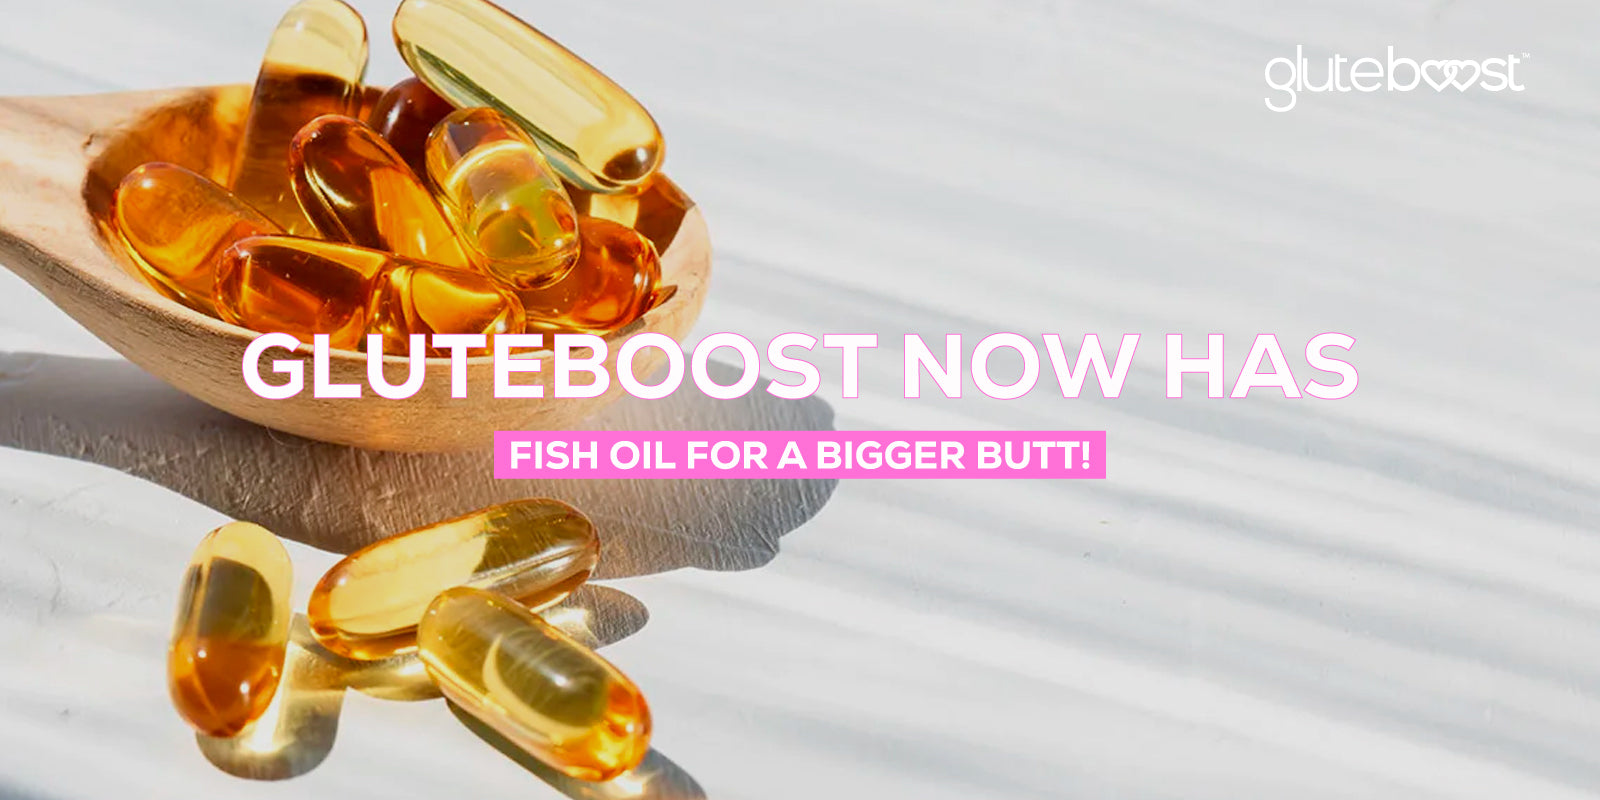 Gluteboost Now Has Fish Oil for a Bigger Butt!!